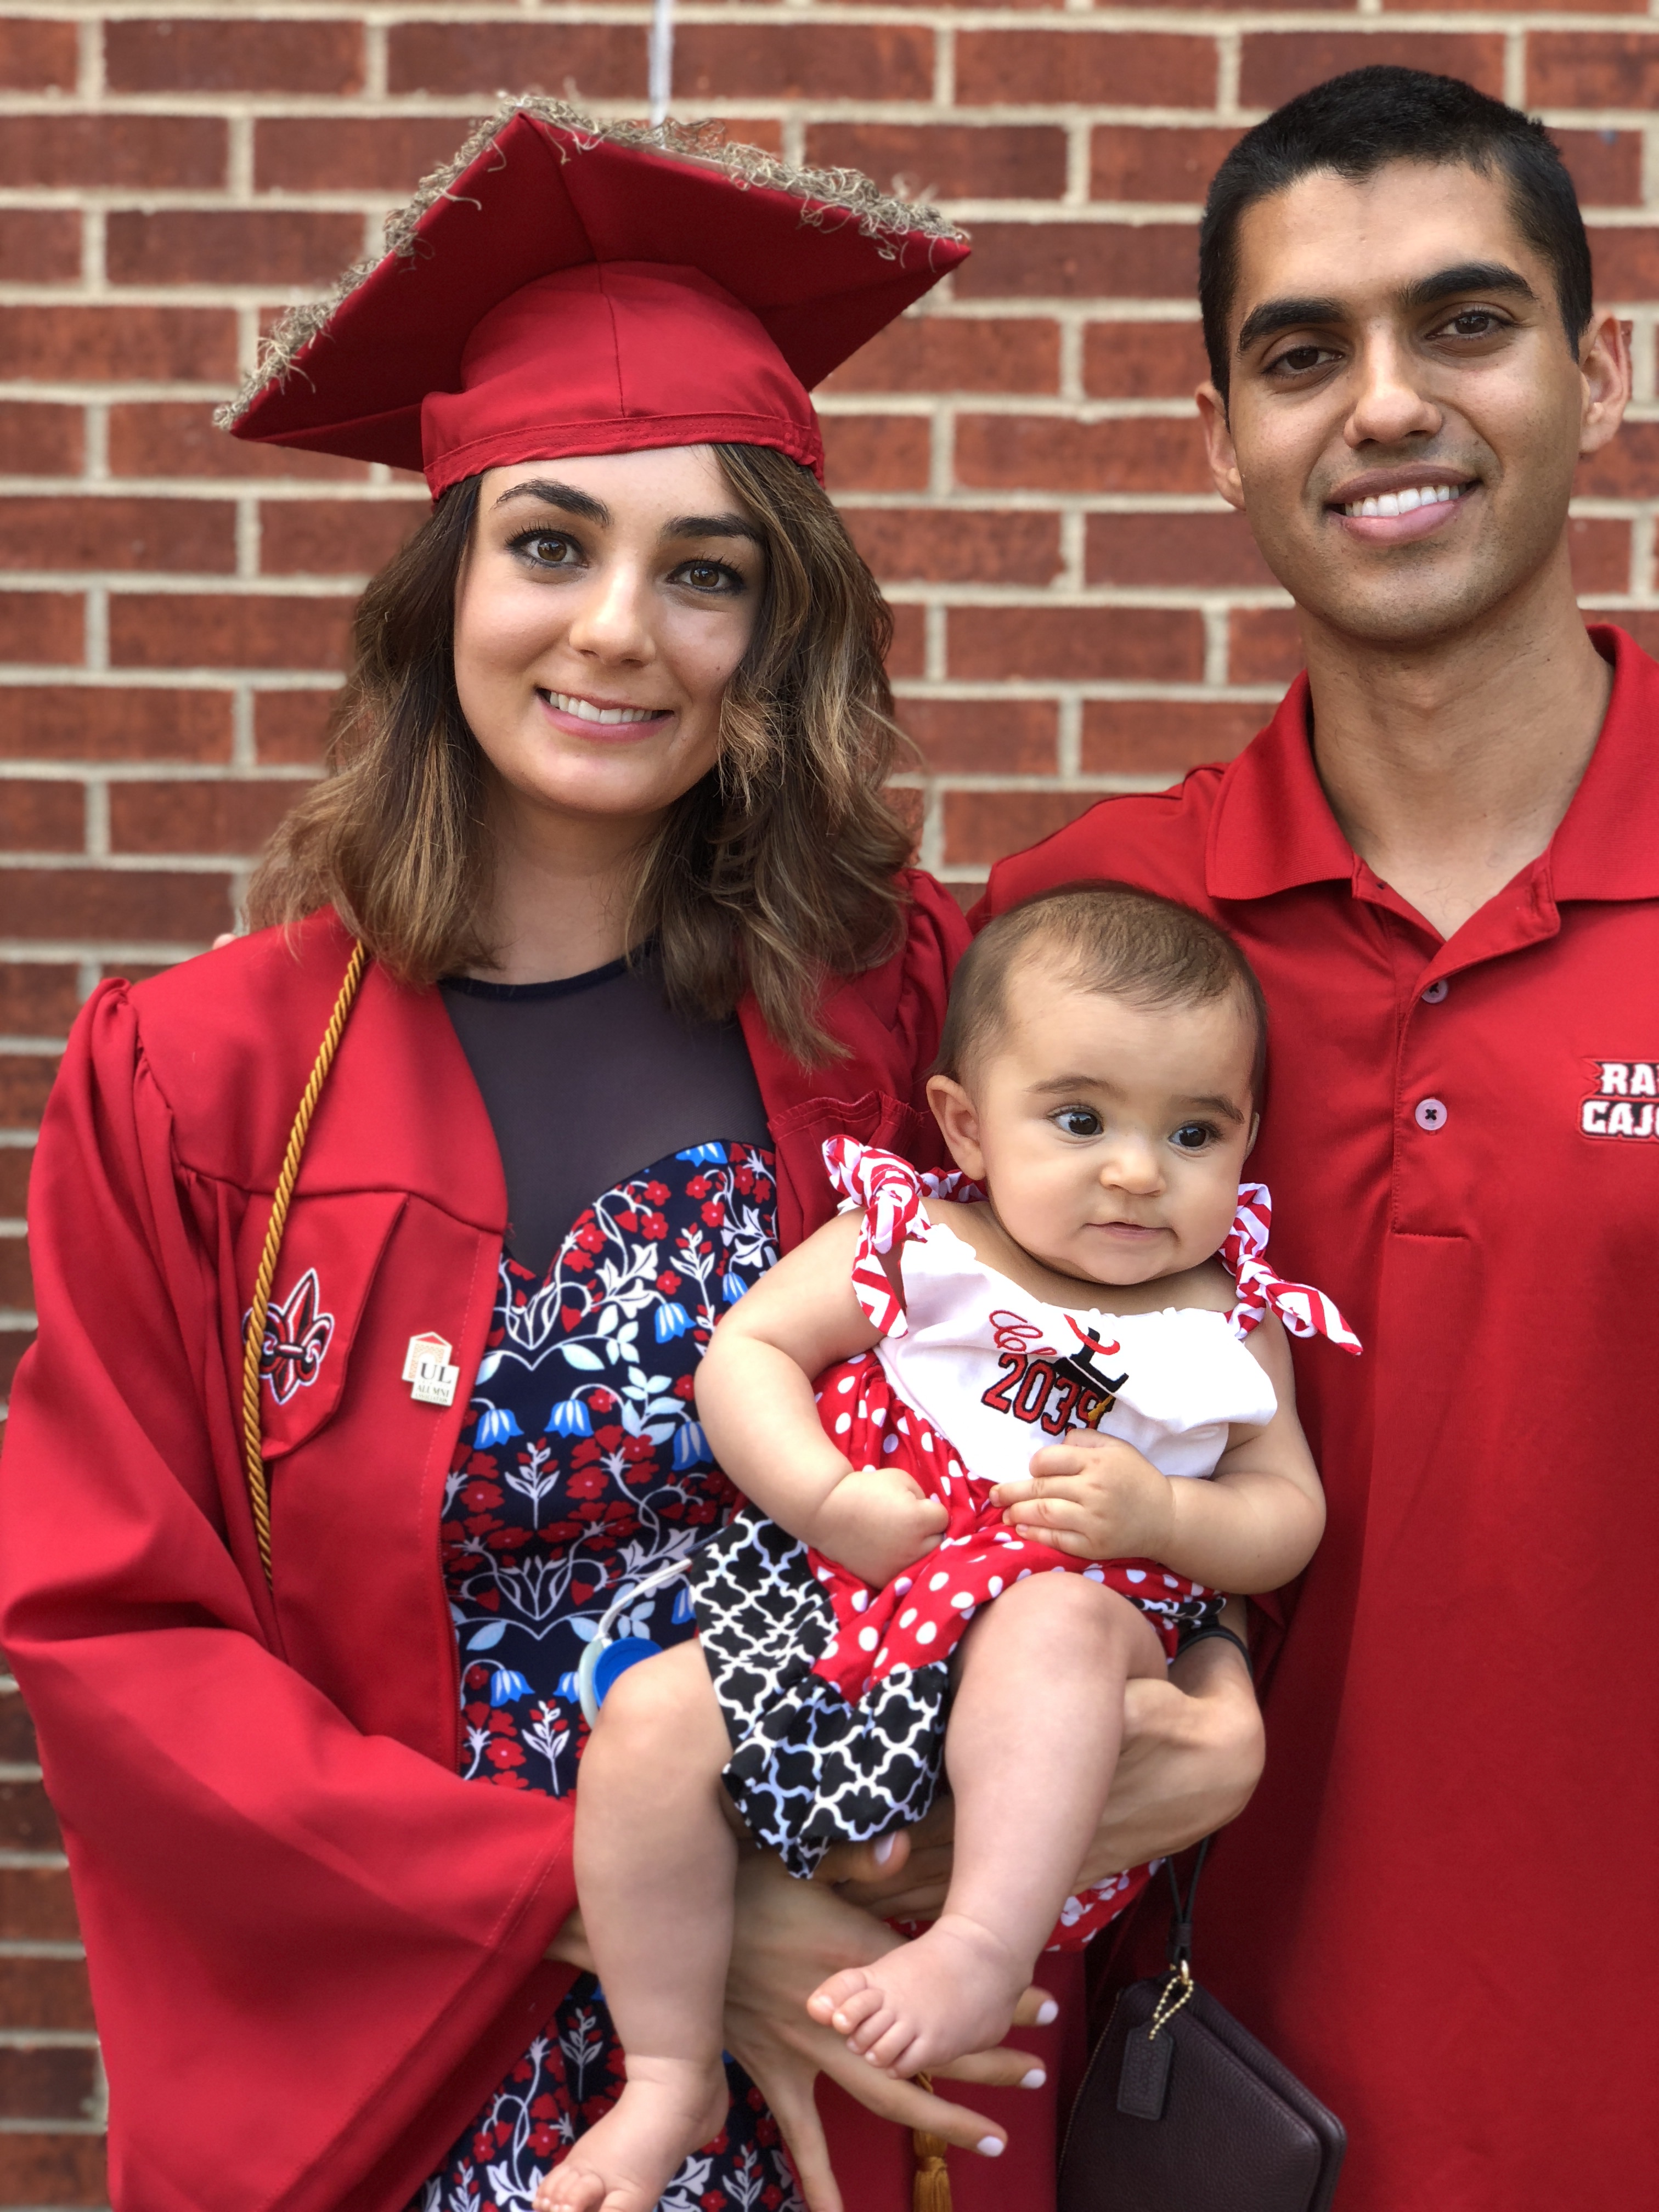 General Studies Online alumni Kailee Marikar is pictured with her husband and infant daughter following Spring 2018 commencement ceremonies.